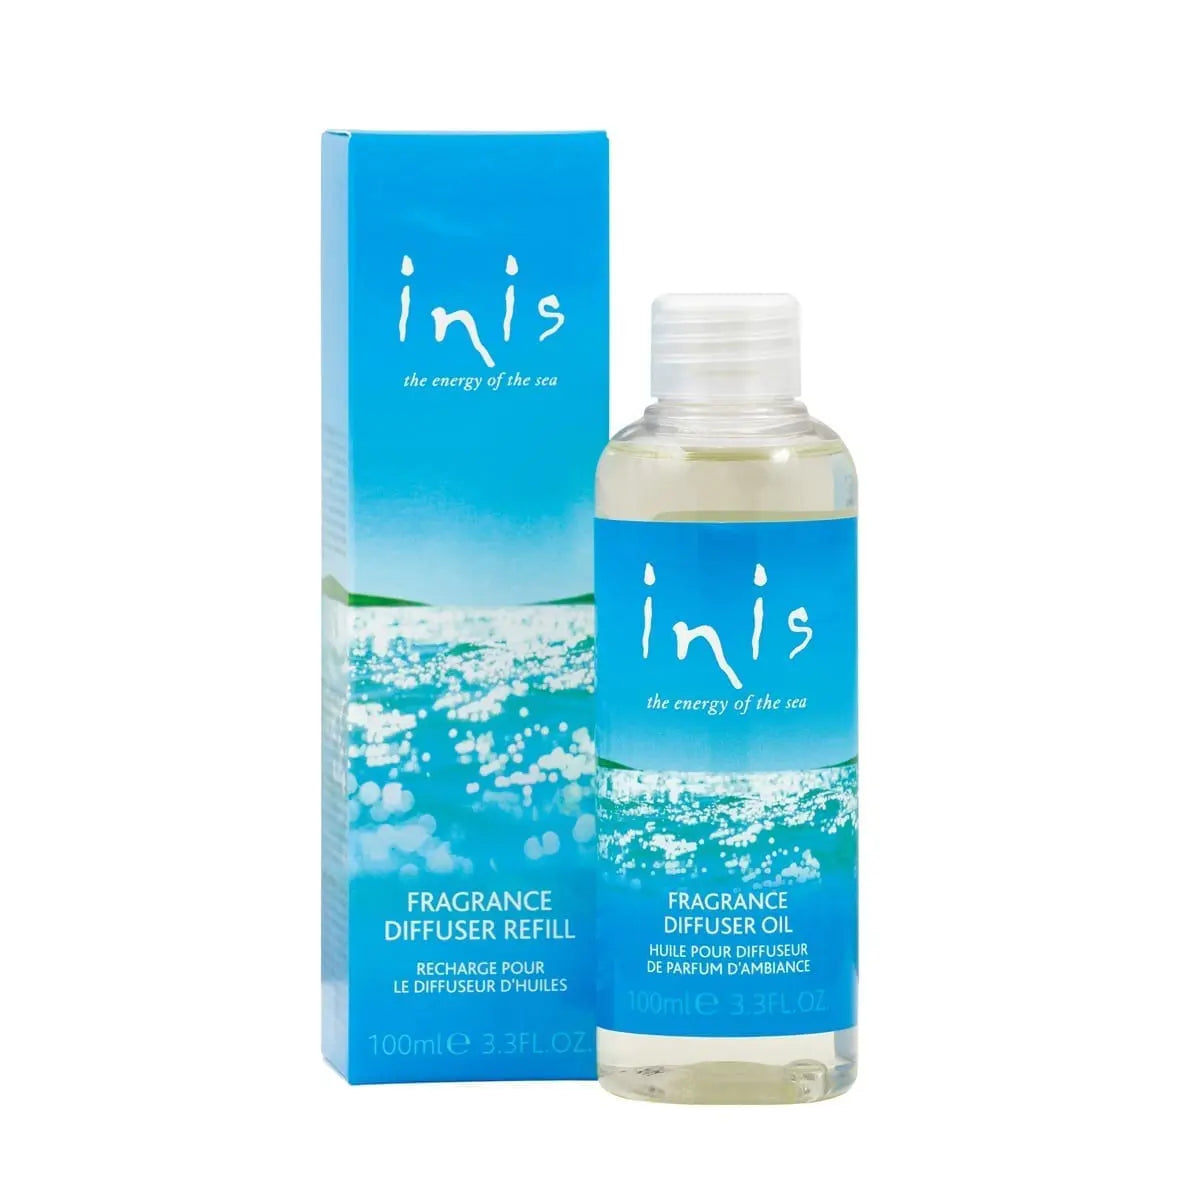 Inis Diffuser Fragrance Refill